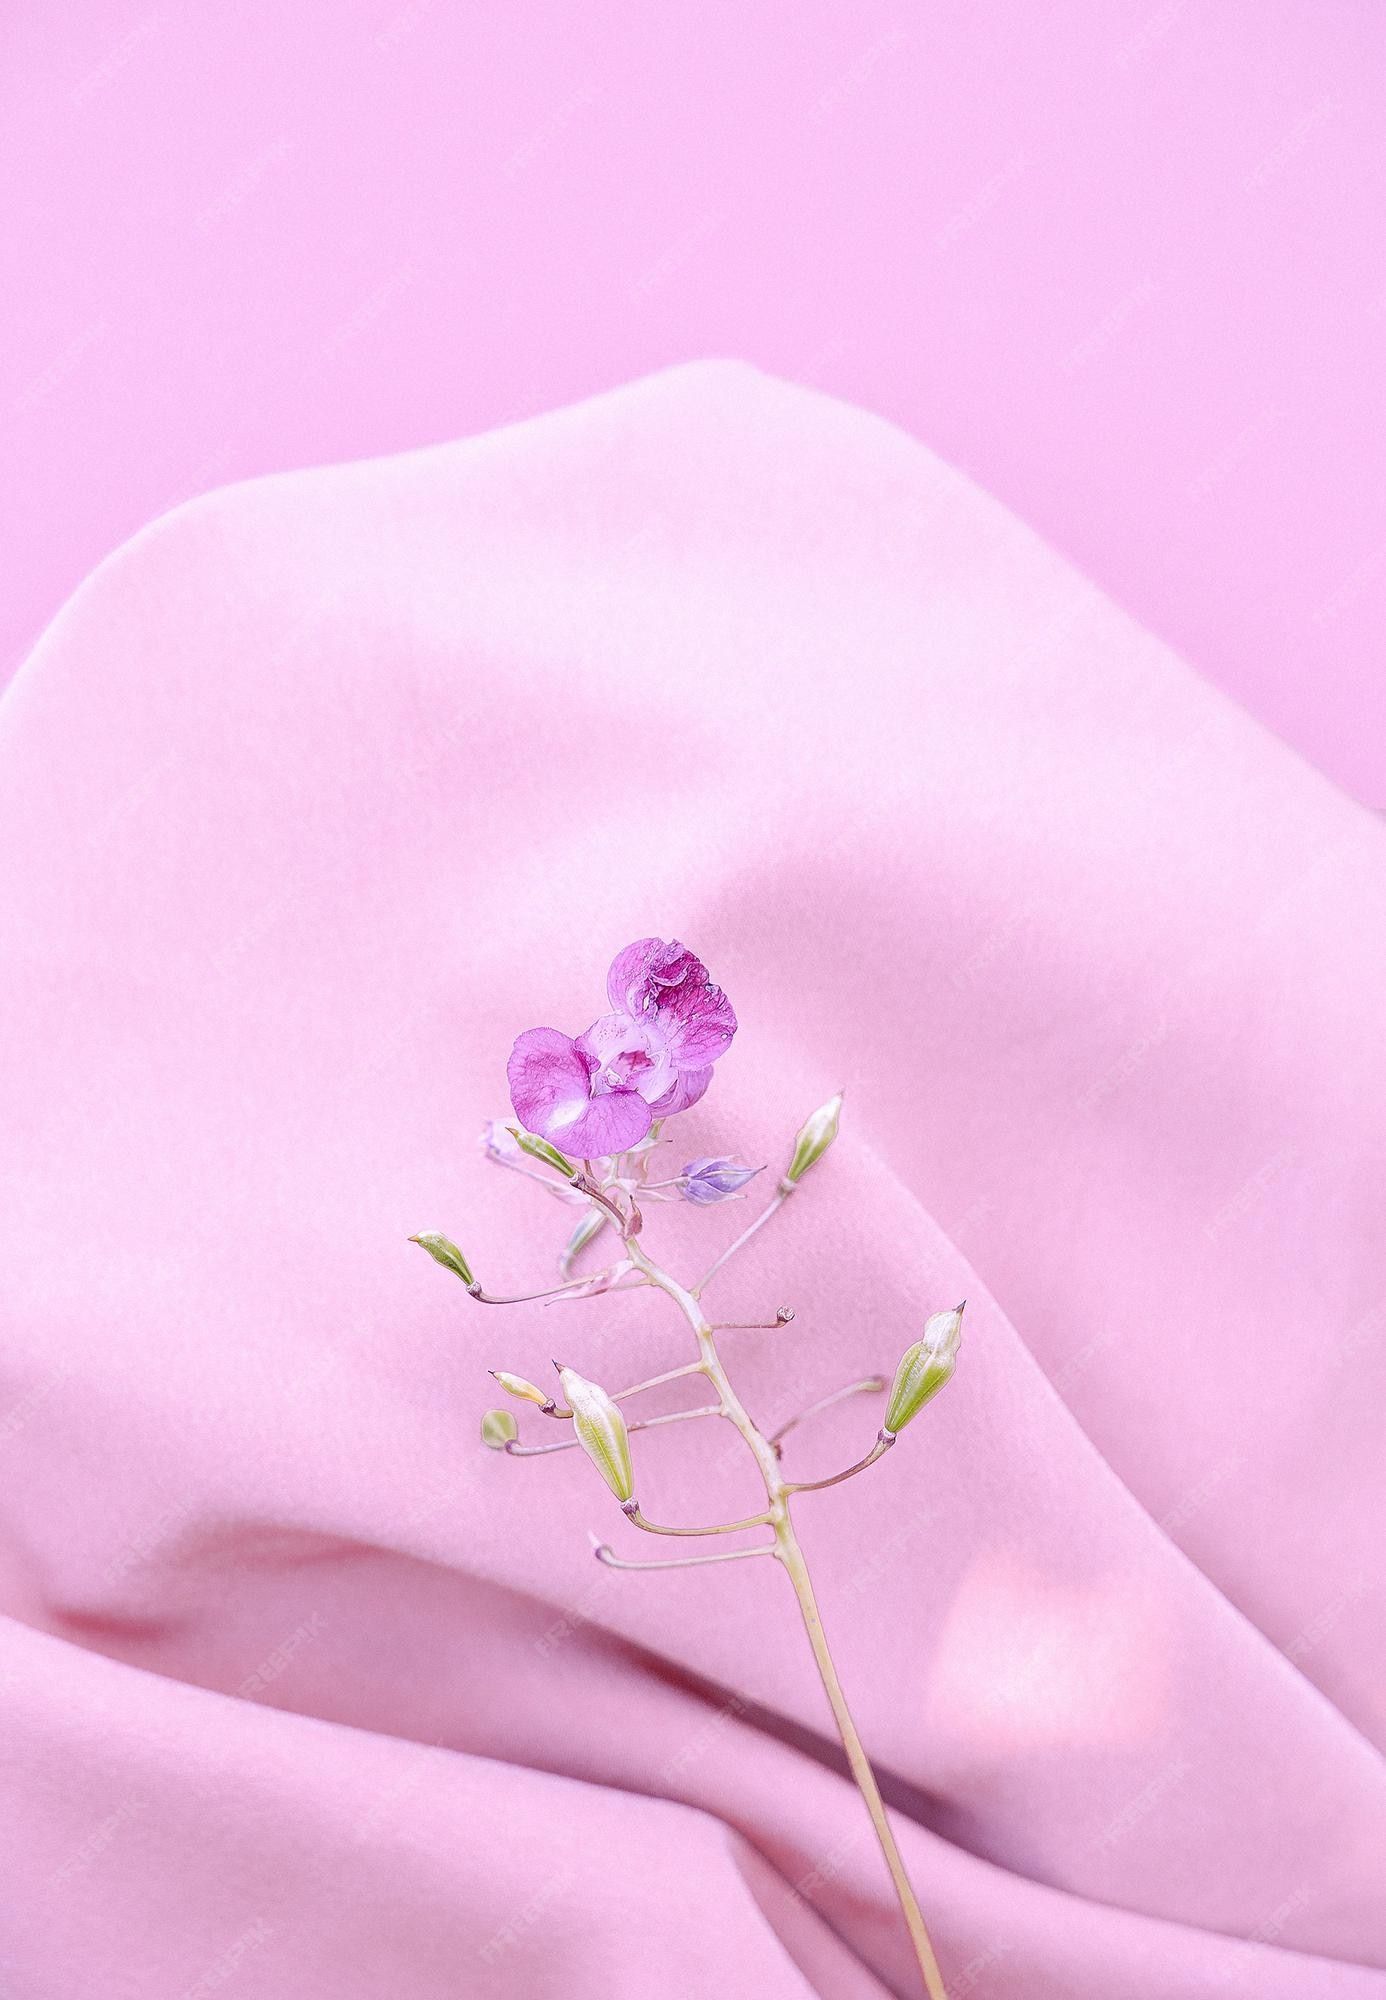 Premium Photo. Purple flower on pink silk fabric background. aesthetic minimal wallpaper. summer spring floral plant composition